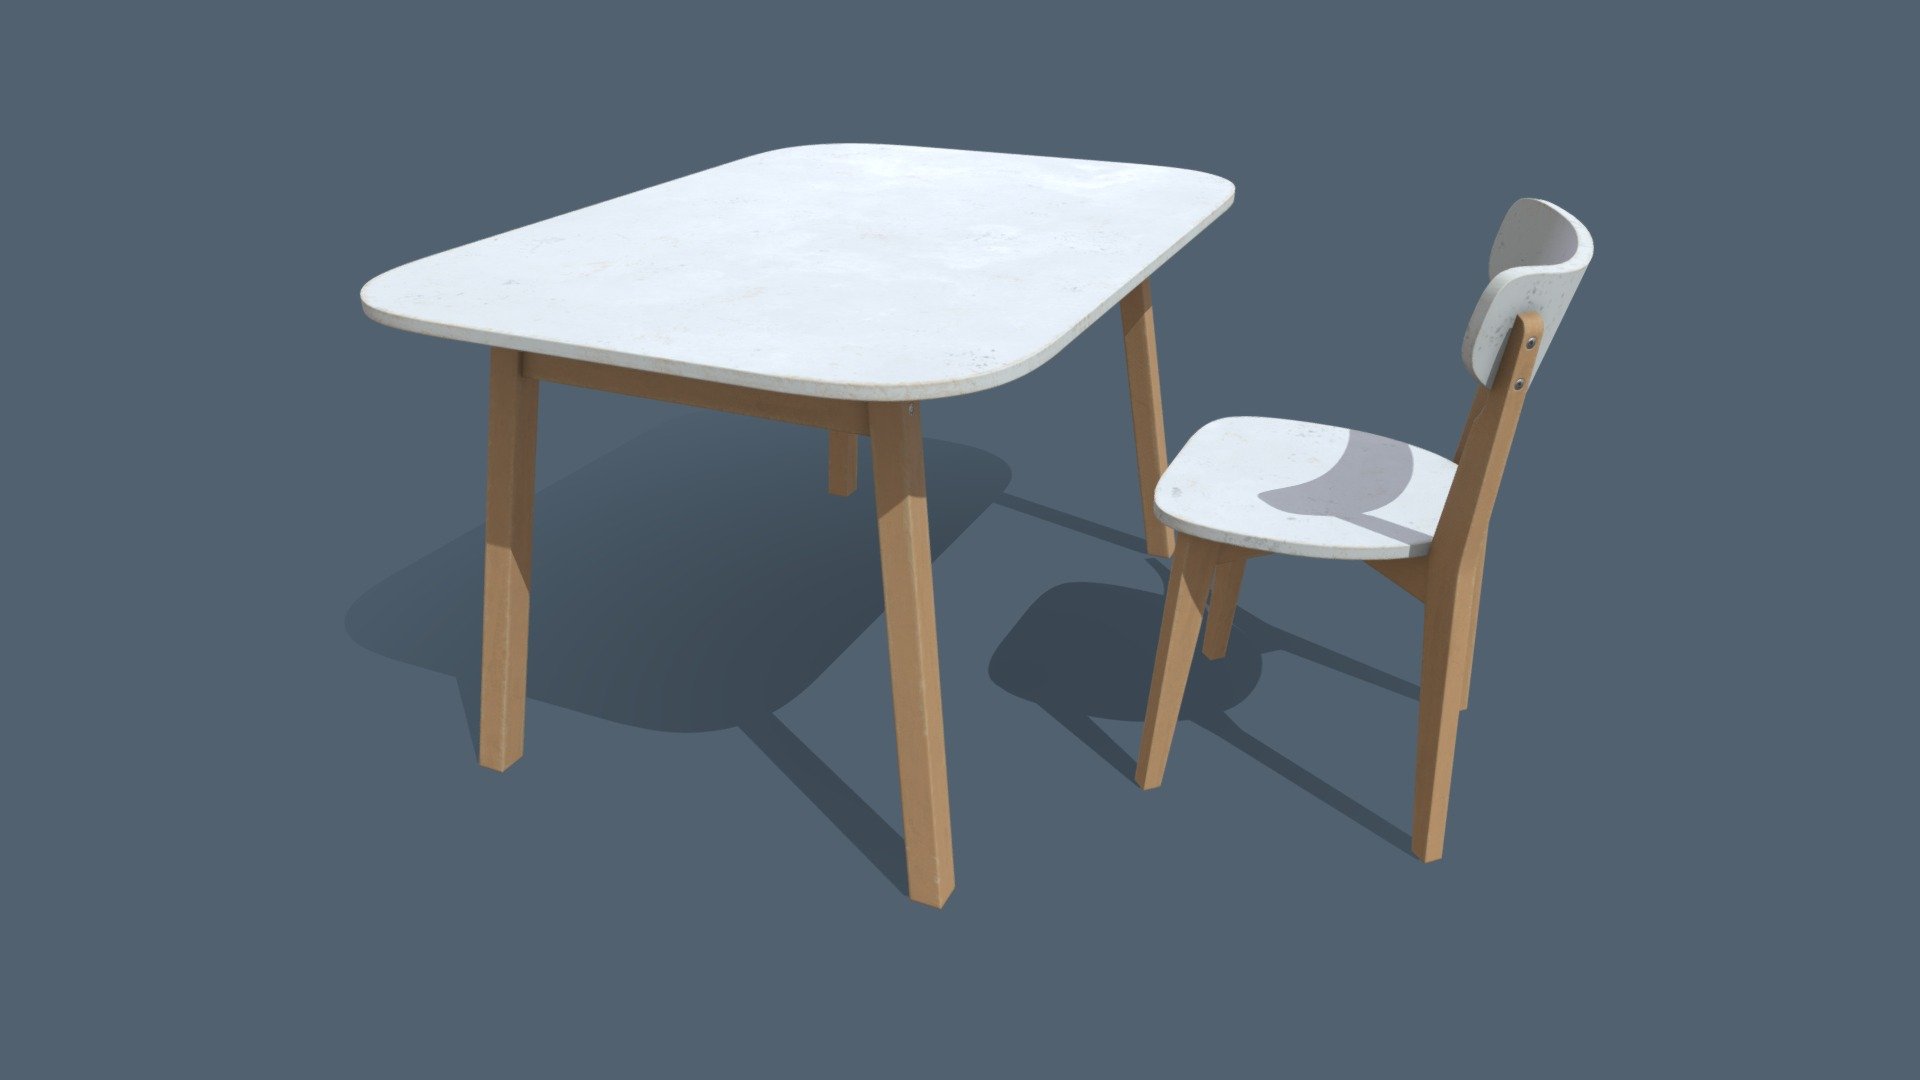 Game ready low-poly Old Dining Table and Chair models with PBR textures for game engines/renderers. 4096x4096 PBR Metallic/Roughness textures.

This product is intended for game/real time/background use. This model is not intended for subdivision. Geometry is triangulated. Model unwrapped manually. All materials and objects named appropriately. Scaled to approximate real world size. Tested in Marmoset Toolbag 3. Tested in Unreal Engine 4. Tested in Unity. No special plugins needed. .obj and .fbx versions exported from Blender 2.83.

4096x4096 textures for each models in png format:
- General PBR Metallic/Roughness  textures: BaseColor, Metallic, Roughness, Normal, AO;
- Unity Textures: Albedo, MetallicSmoothness, Normal, AO;
- Unreal Engine 4 textures: BaseColor, OcclusionRoughnessMetallic, Normal;
- PBR Specular/Glossiness textures: Diffuse, Specular, Glossiness, Normal, AO.

Also included clean variant of textures without damage.
 - Old Dining Table and Chair - 3D model by AshMesh 3d model